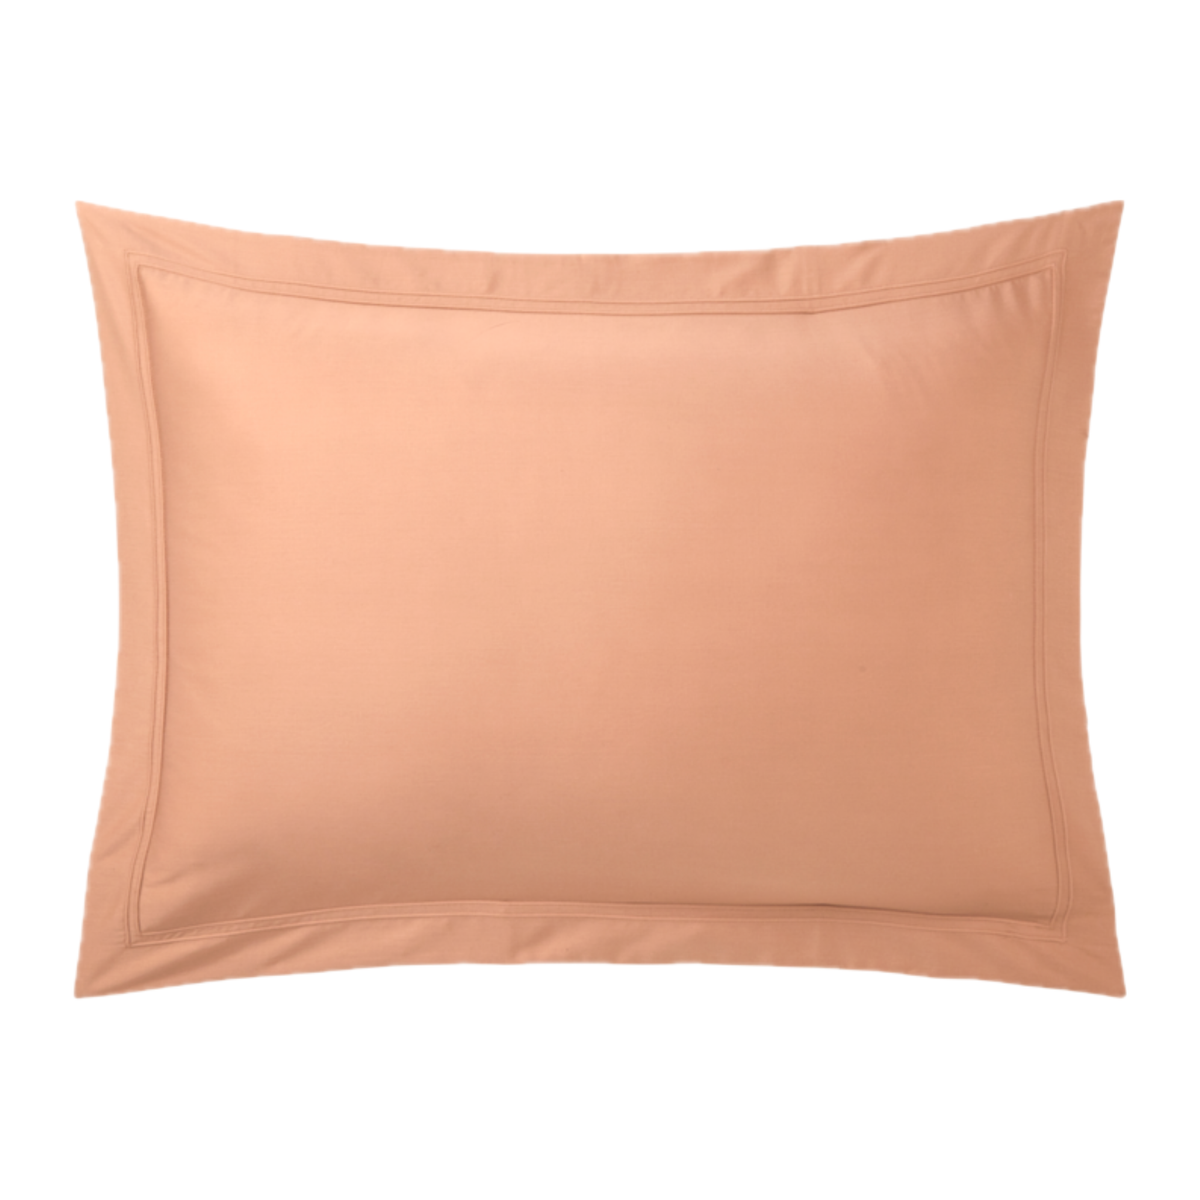 Sham of Yves Delorme Triomphe Bedding in Sienna Color